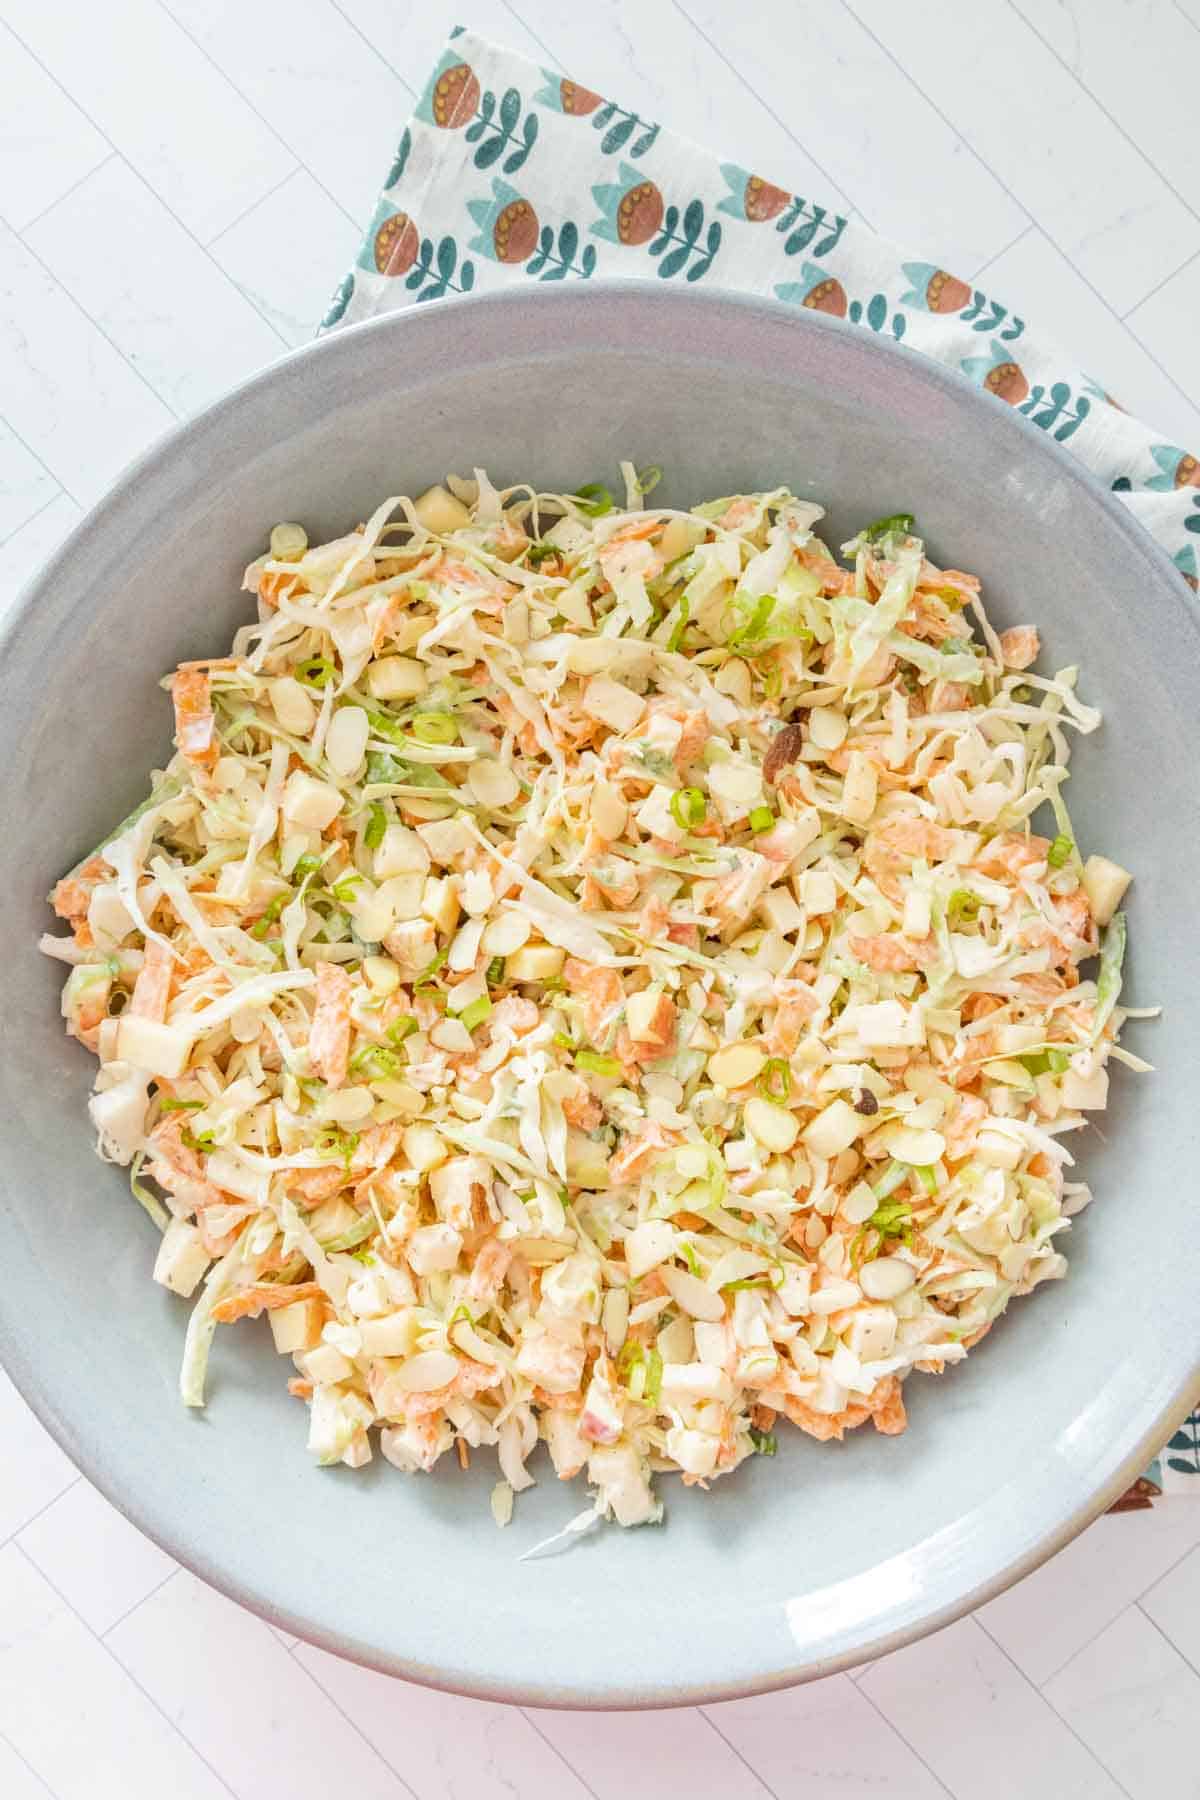 A bowl of slaw with carrots and celery.